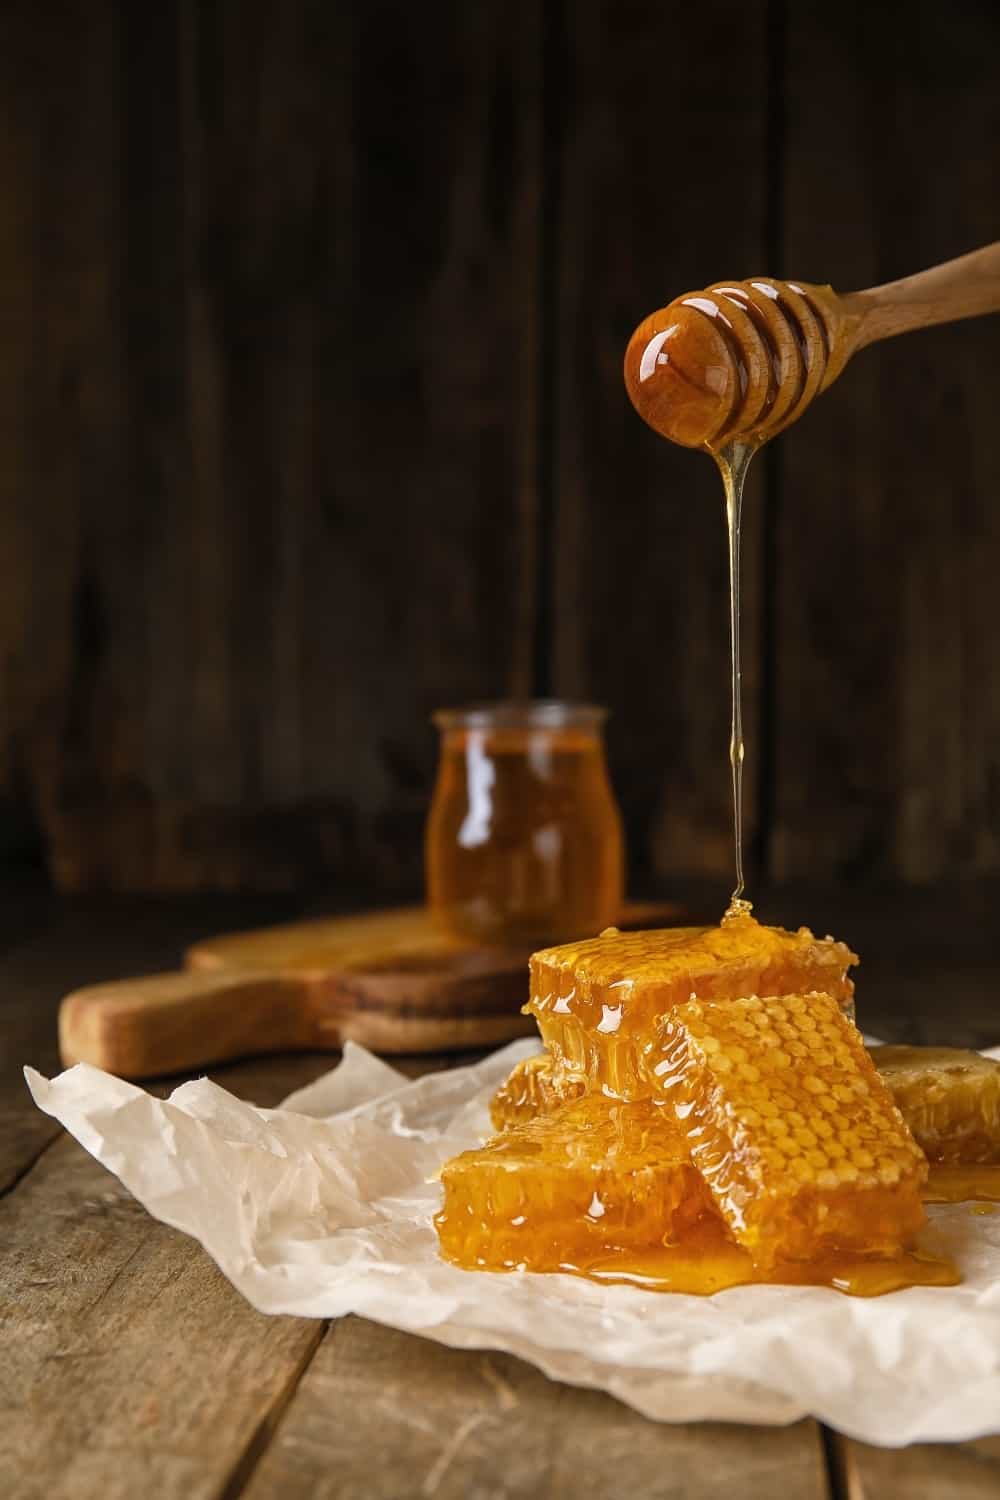 Pouring honey onto combs on wooden background